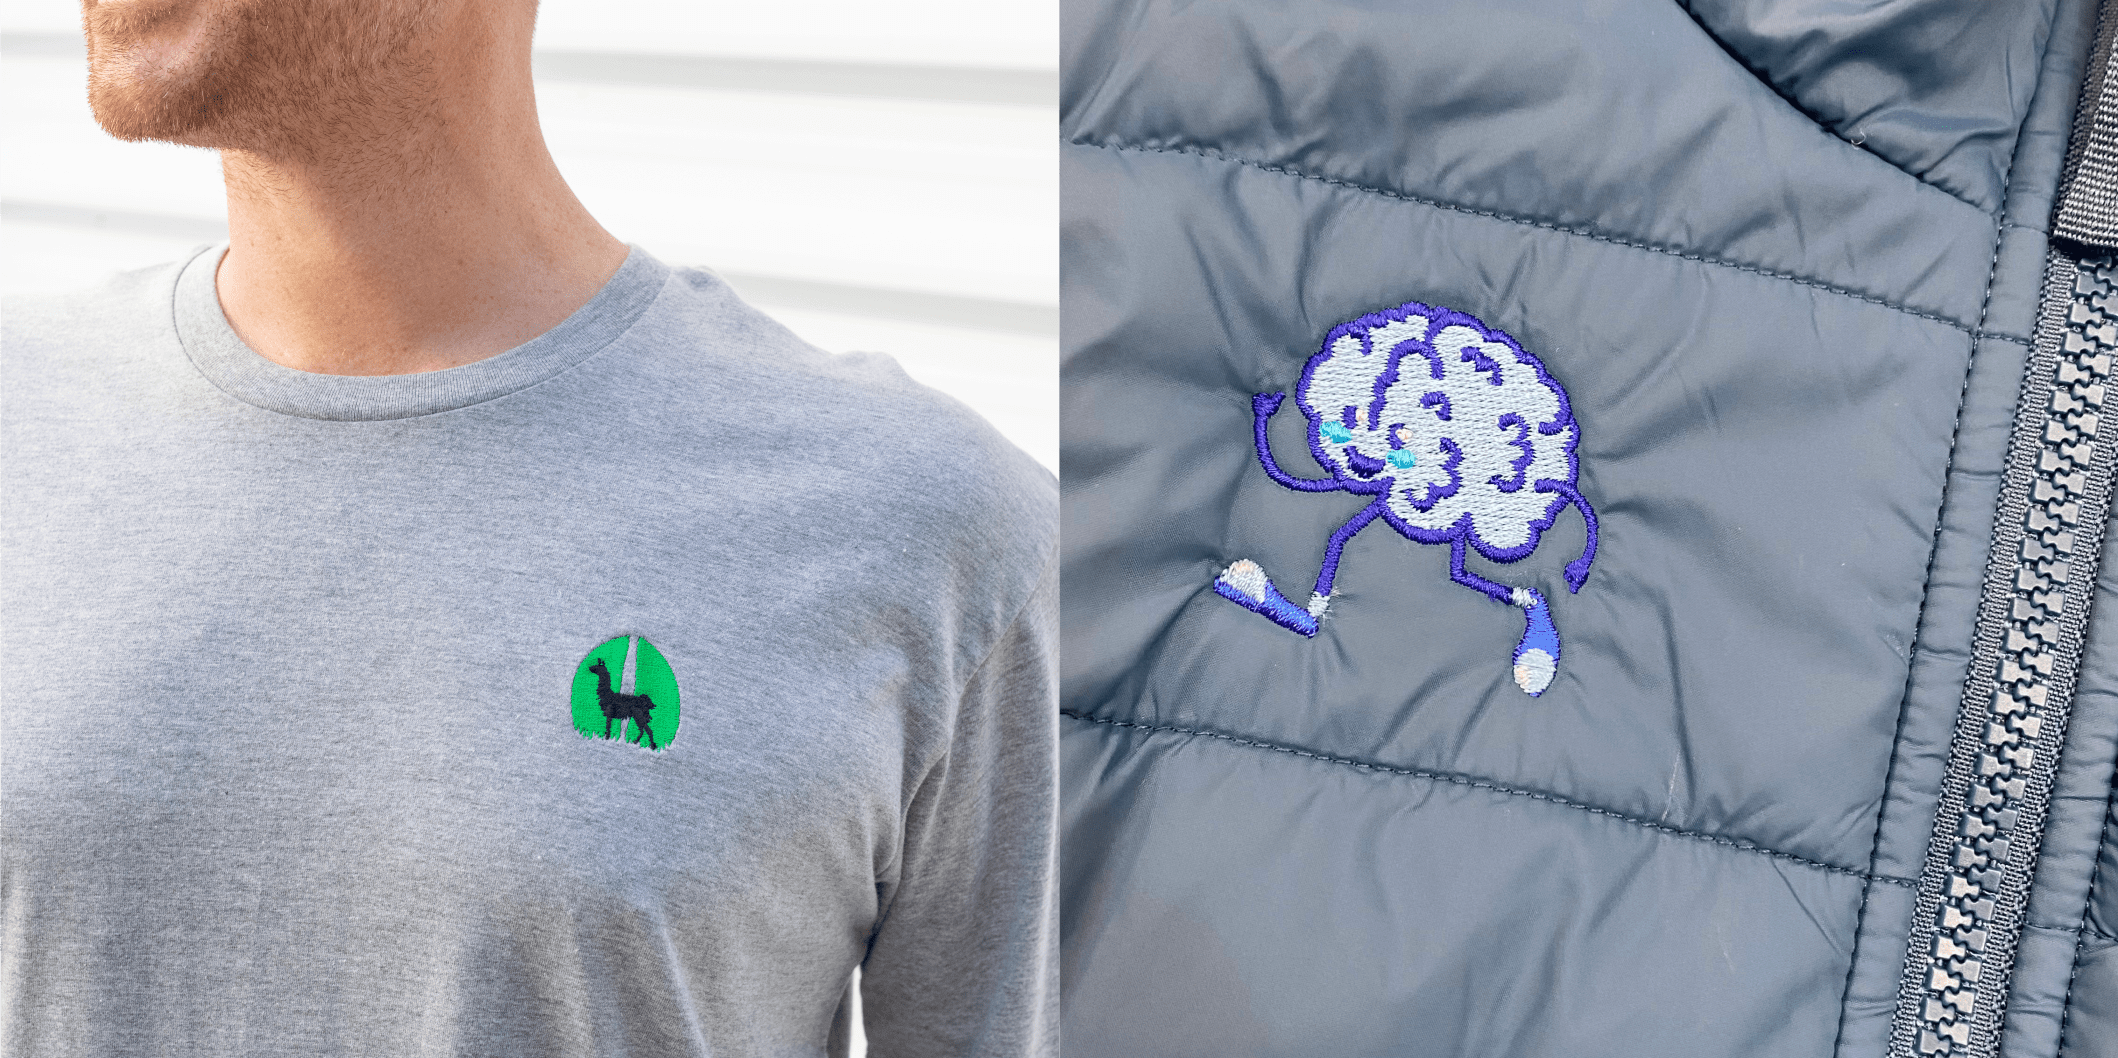 embroidery onto clothing and jackets